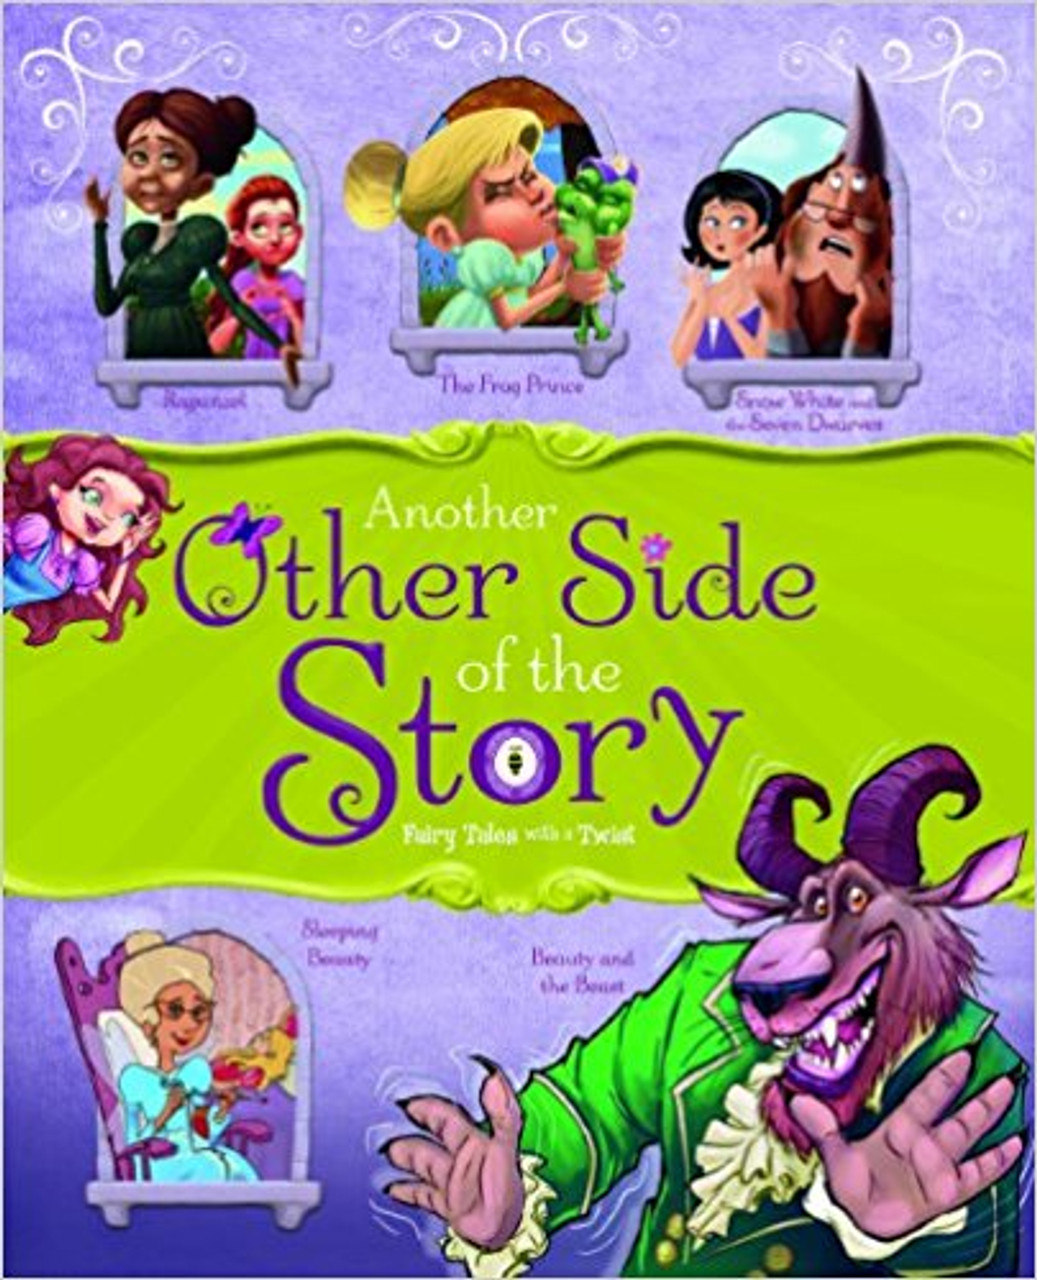 Another Other Side of the Story: Fairy Tales with a Twist by Nancy Loewen